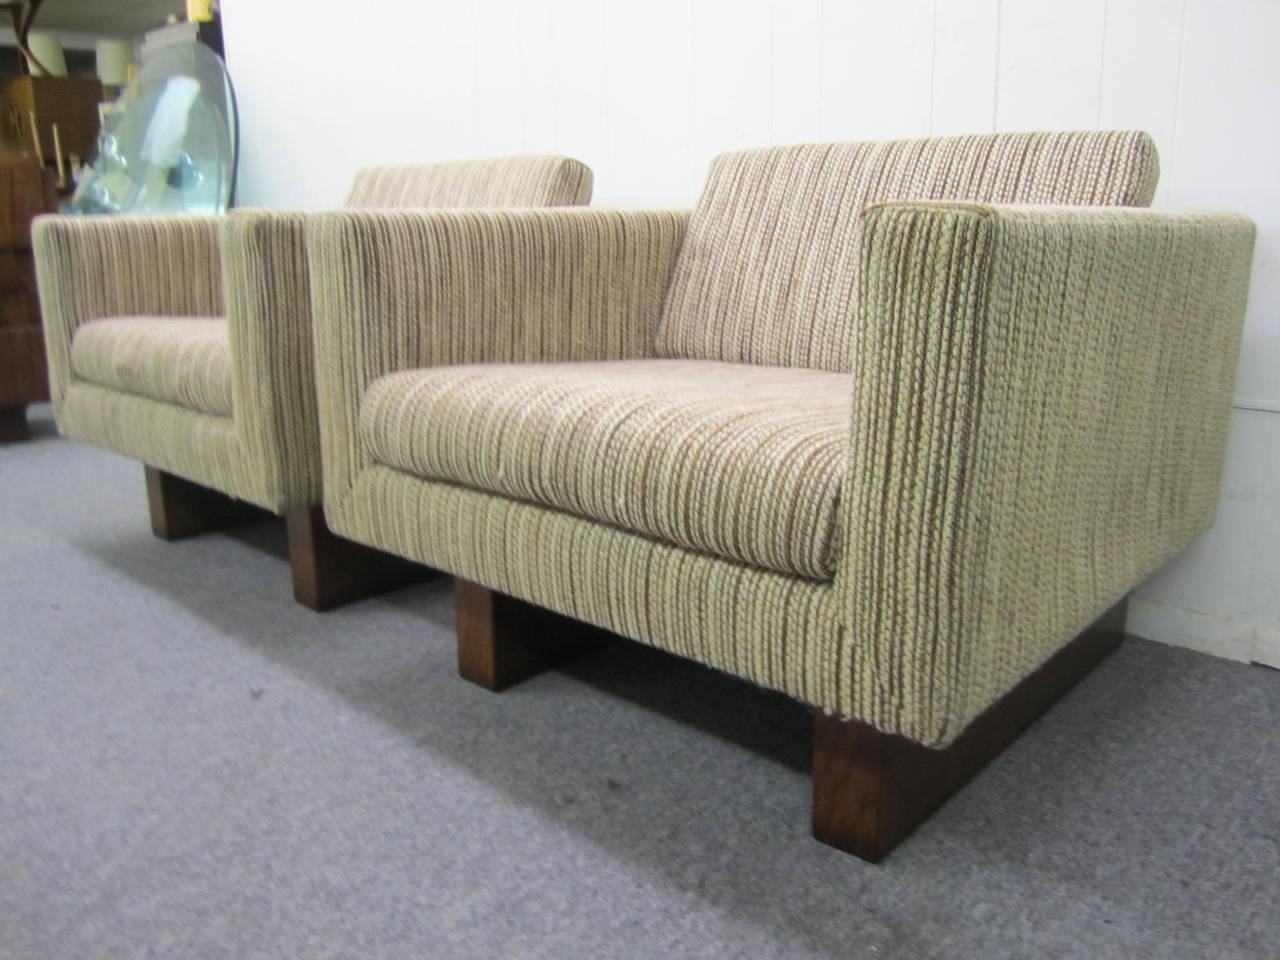 American Rare Pair of Signed Harvey Probber Cube Lounge Chairs, Mid-Century Modern For Sale